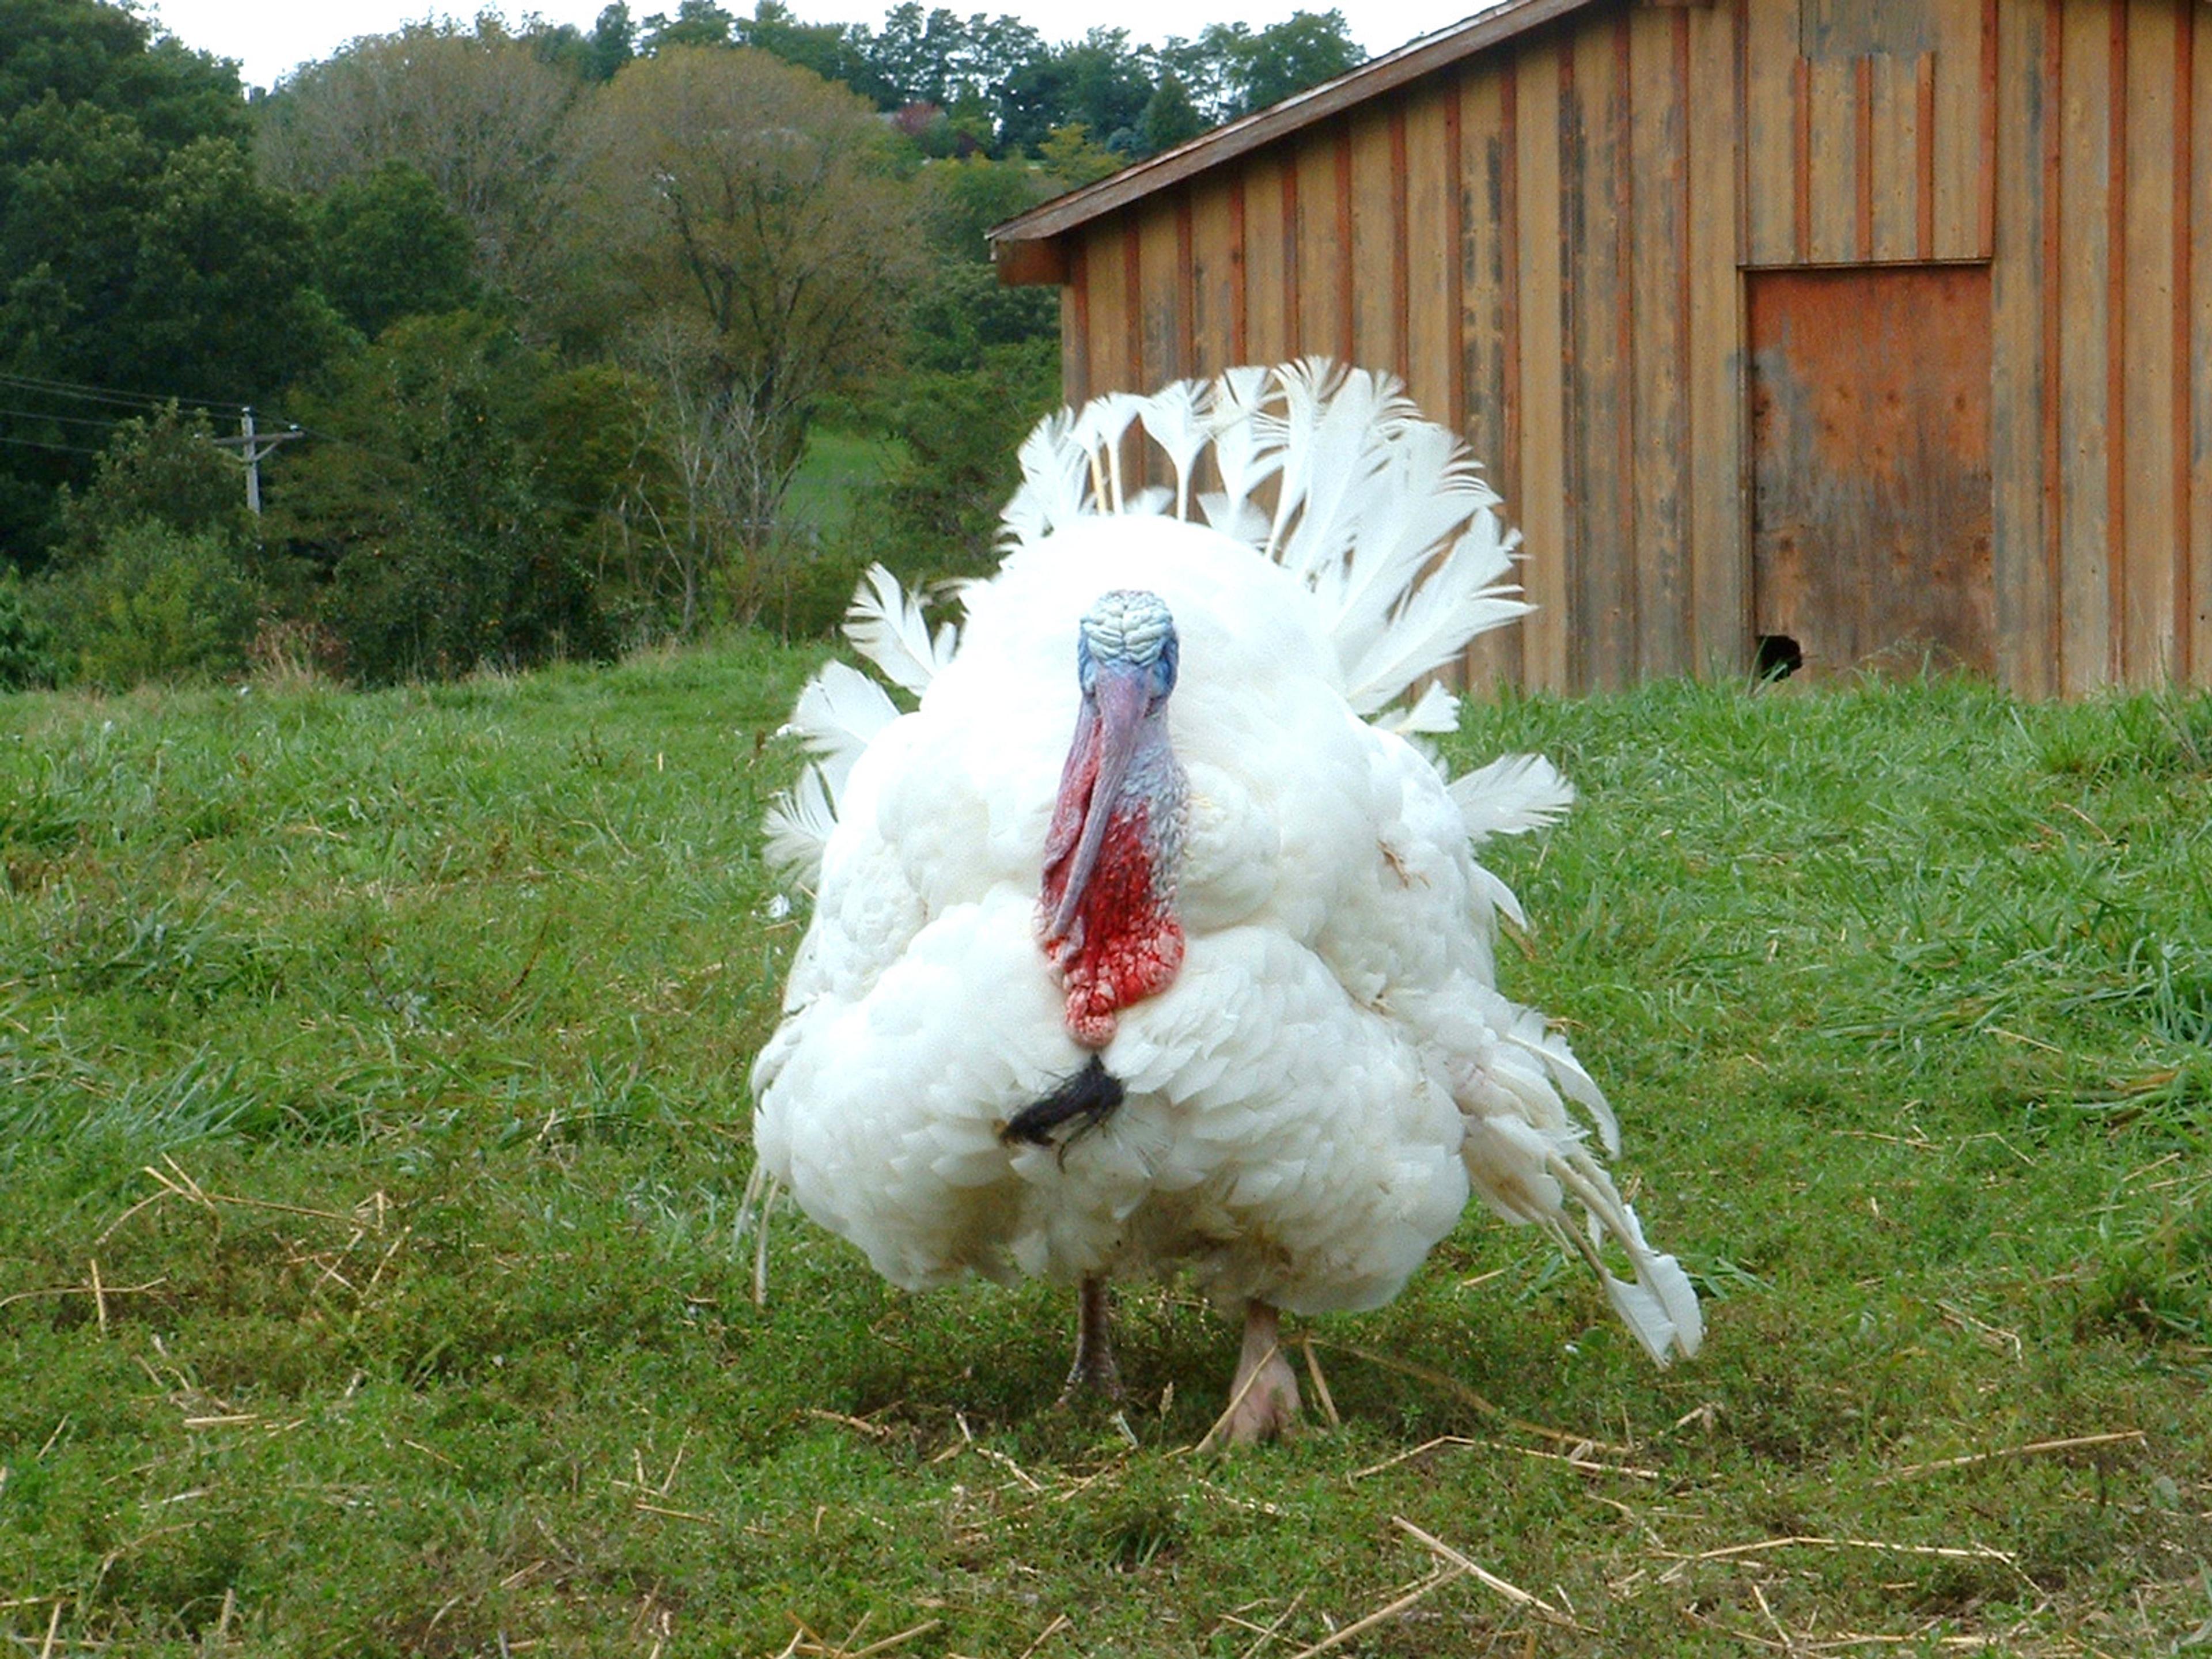 A Broad-Breasted White turkey pictured on pasture on an organic farm.